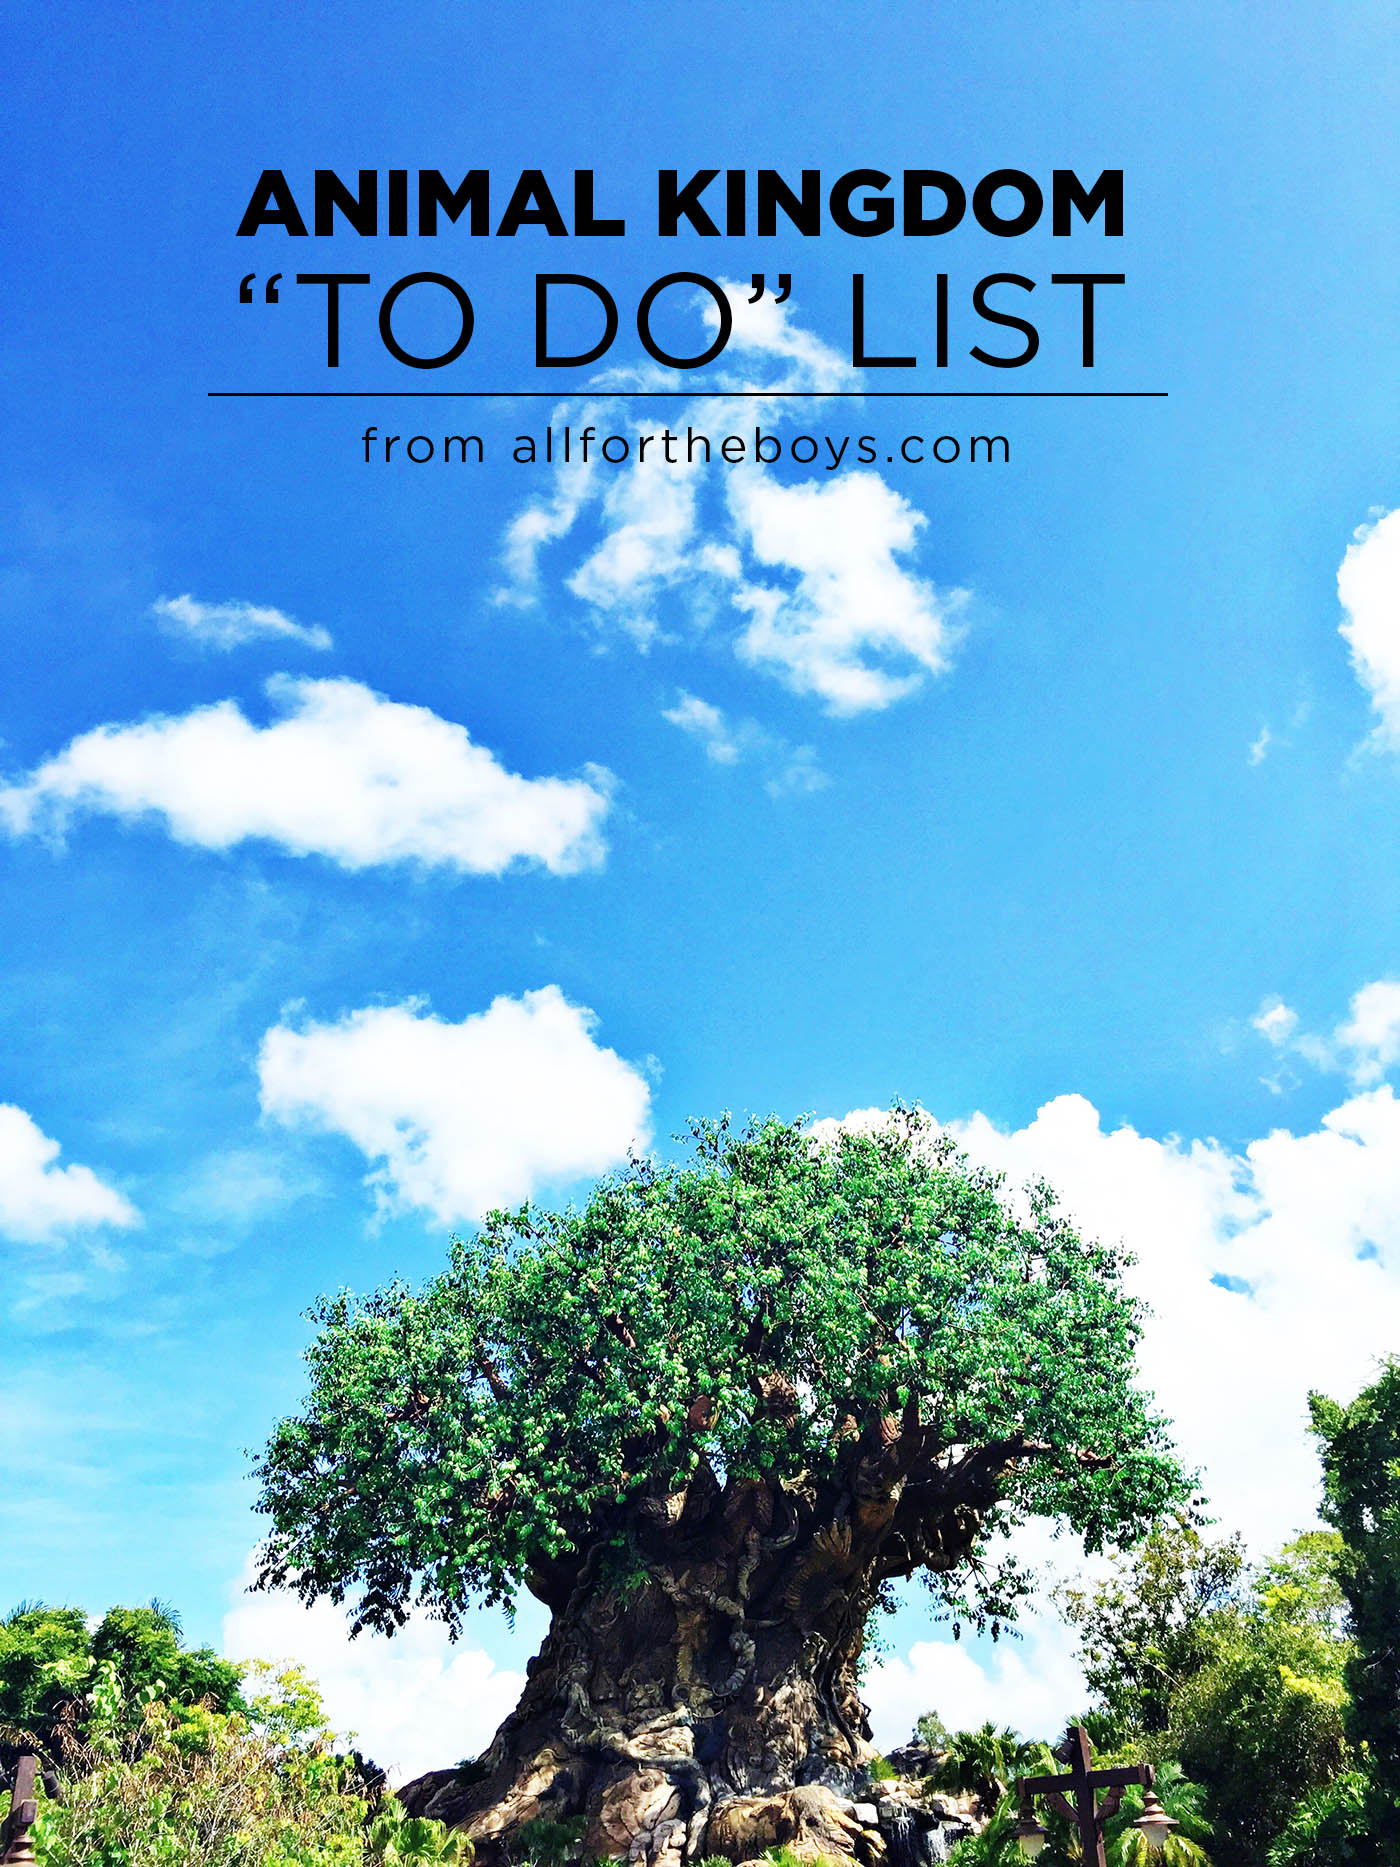 Animal Kingdom "To Do" list from the travel writer at the blog allfortheboys.com